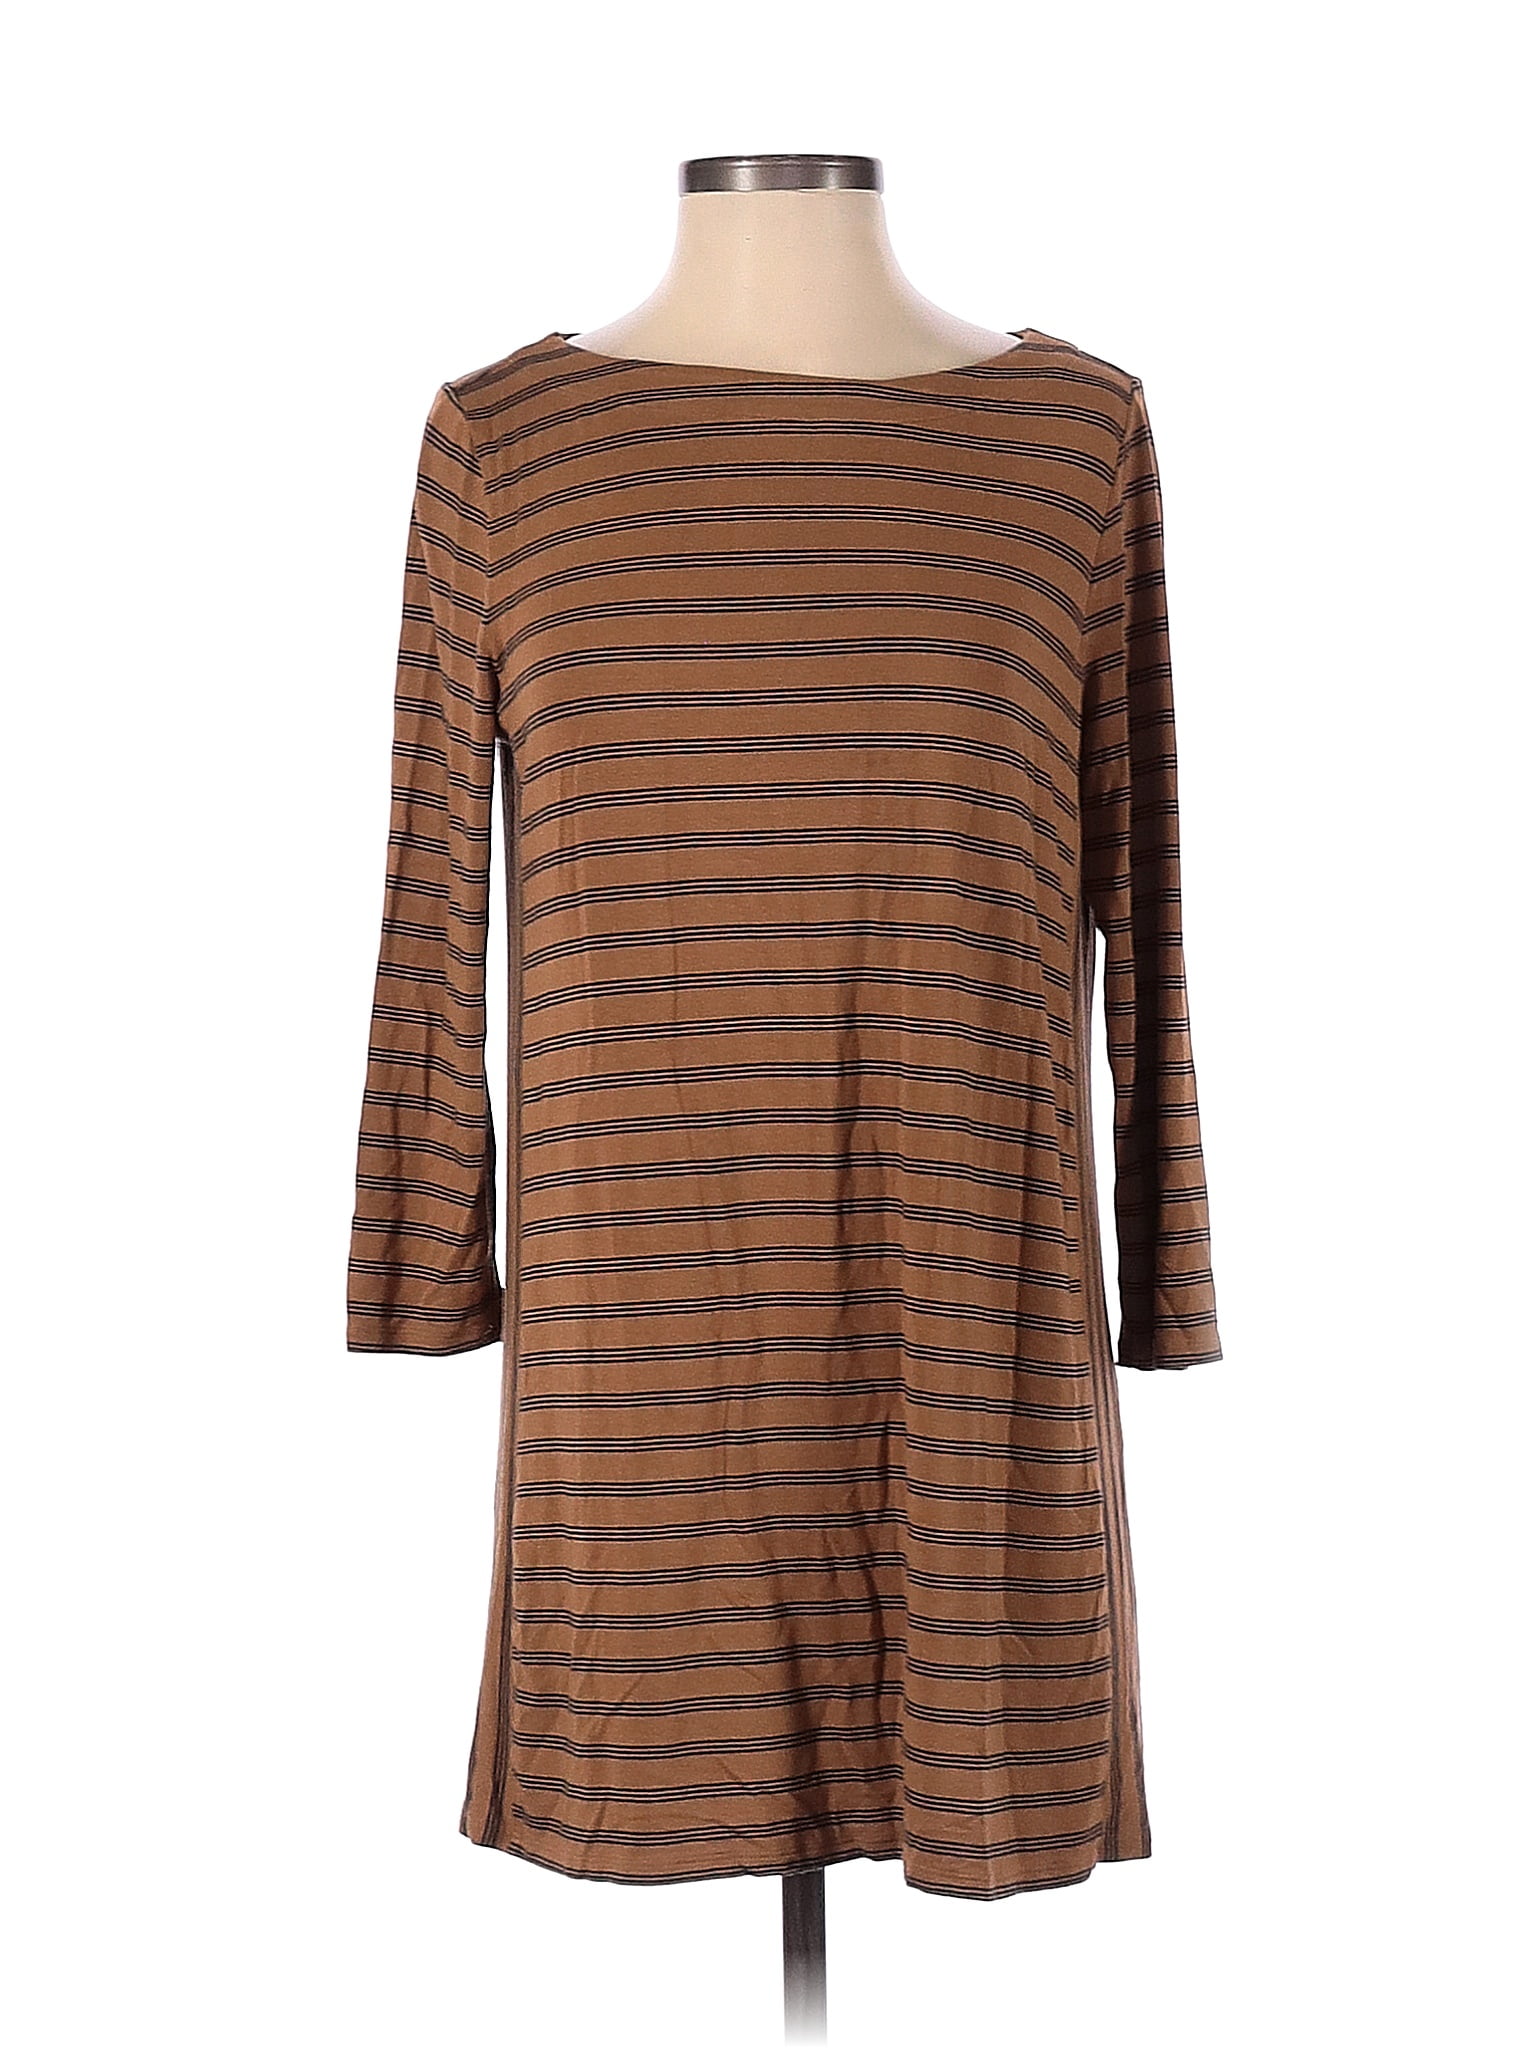 J Jill Tunic Top Size Large – ReflectionsConsignment